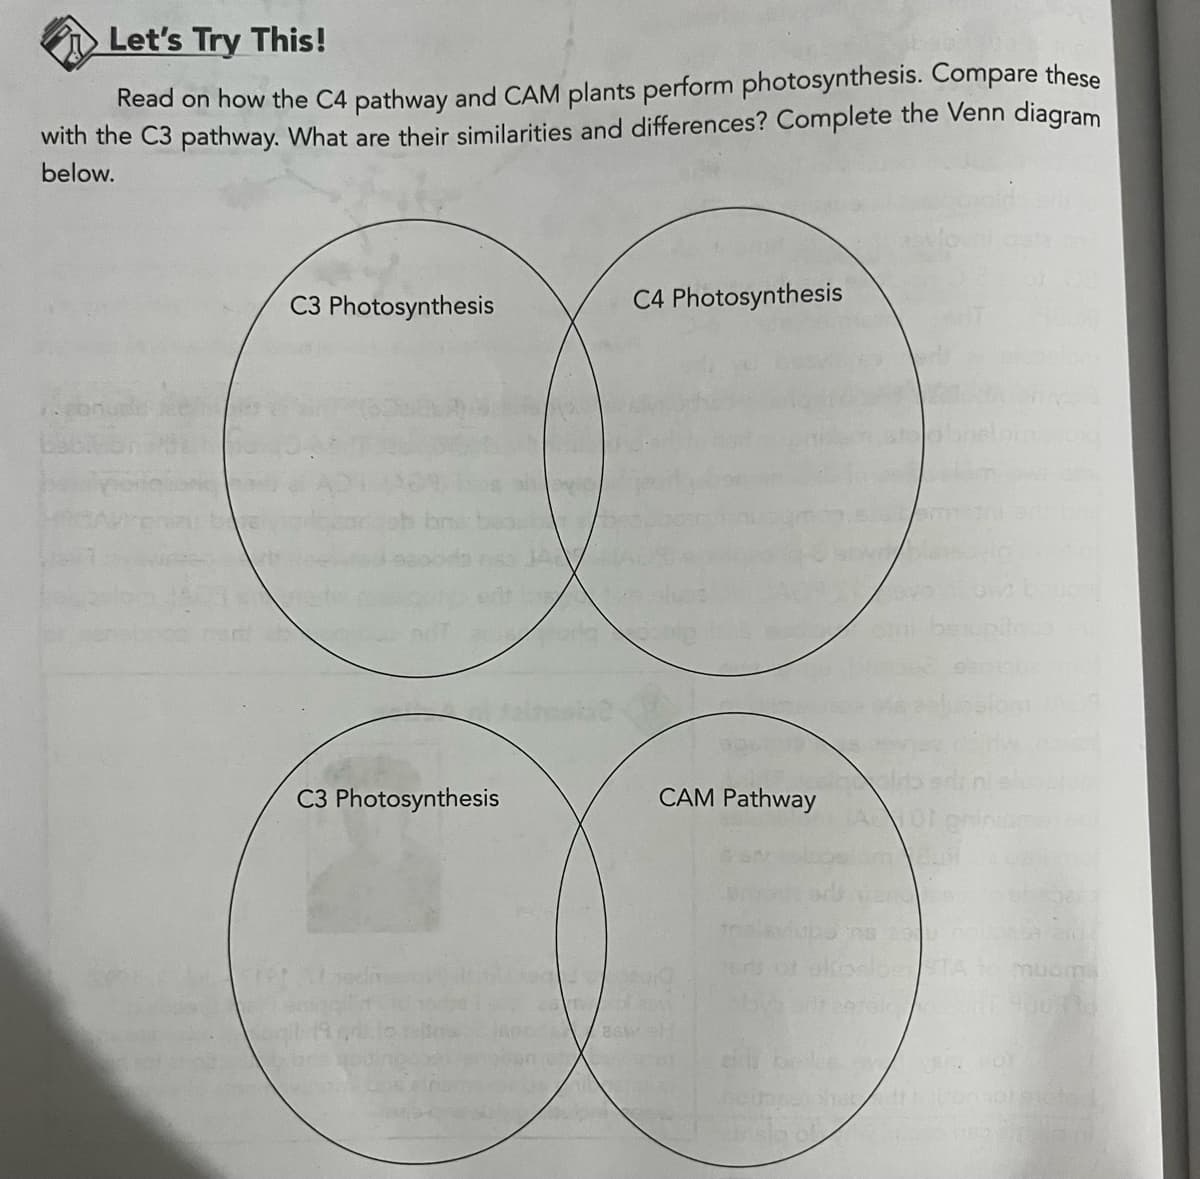 Let's Try This!
Read on how the C4 pathway and CAM plants perform photosynthesis. Compare these
with the C3 pathway. What are their similarities and differences? Complete the Venn diagram
below.
C3 Photosynthesis
C3 Photosynthesis
C4 Photosynthesis
CAM Pathway
ar sig of
1657